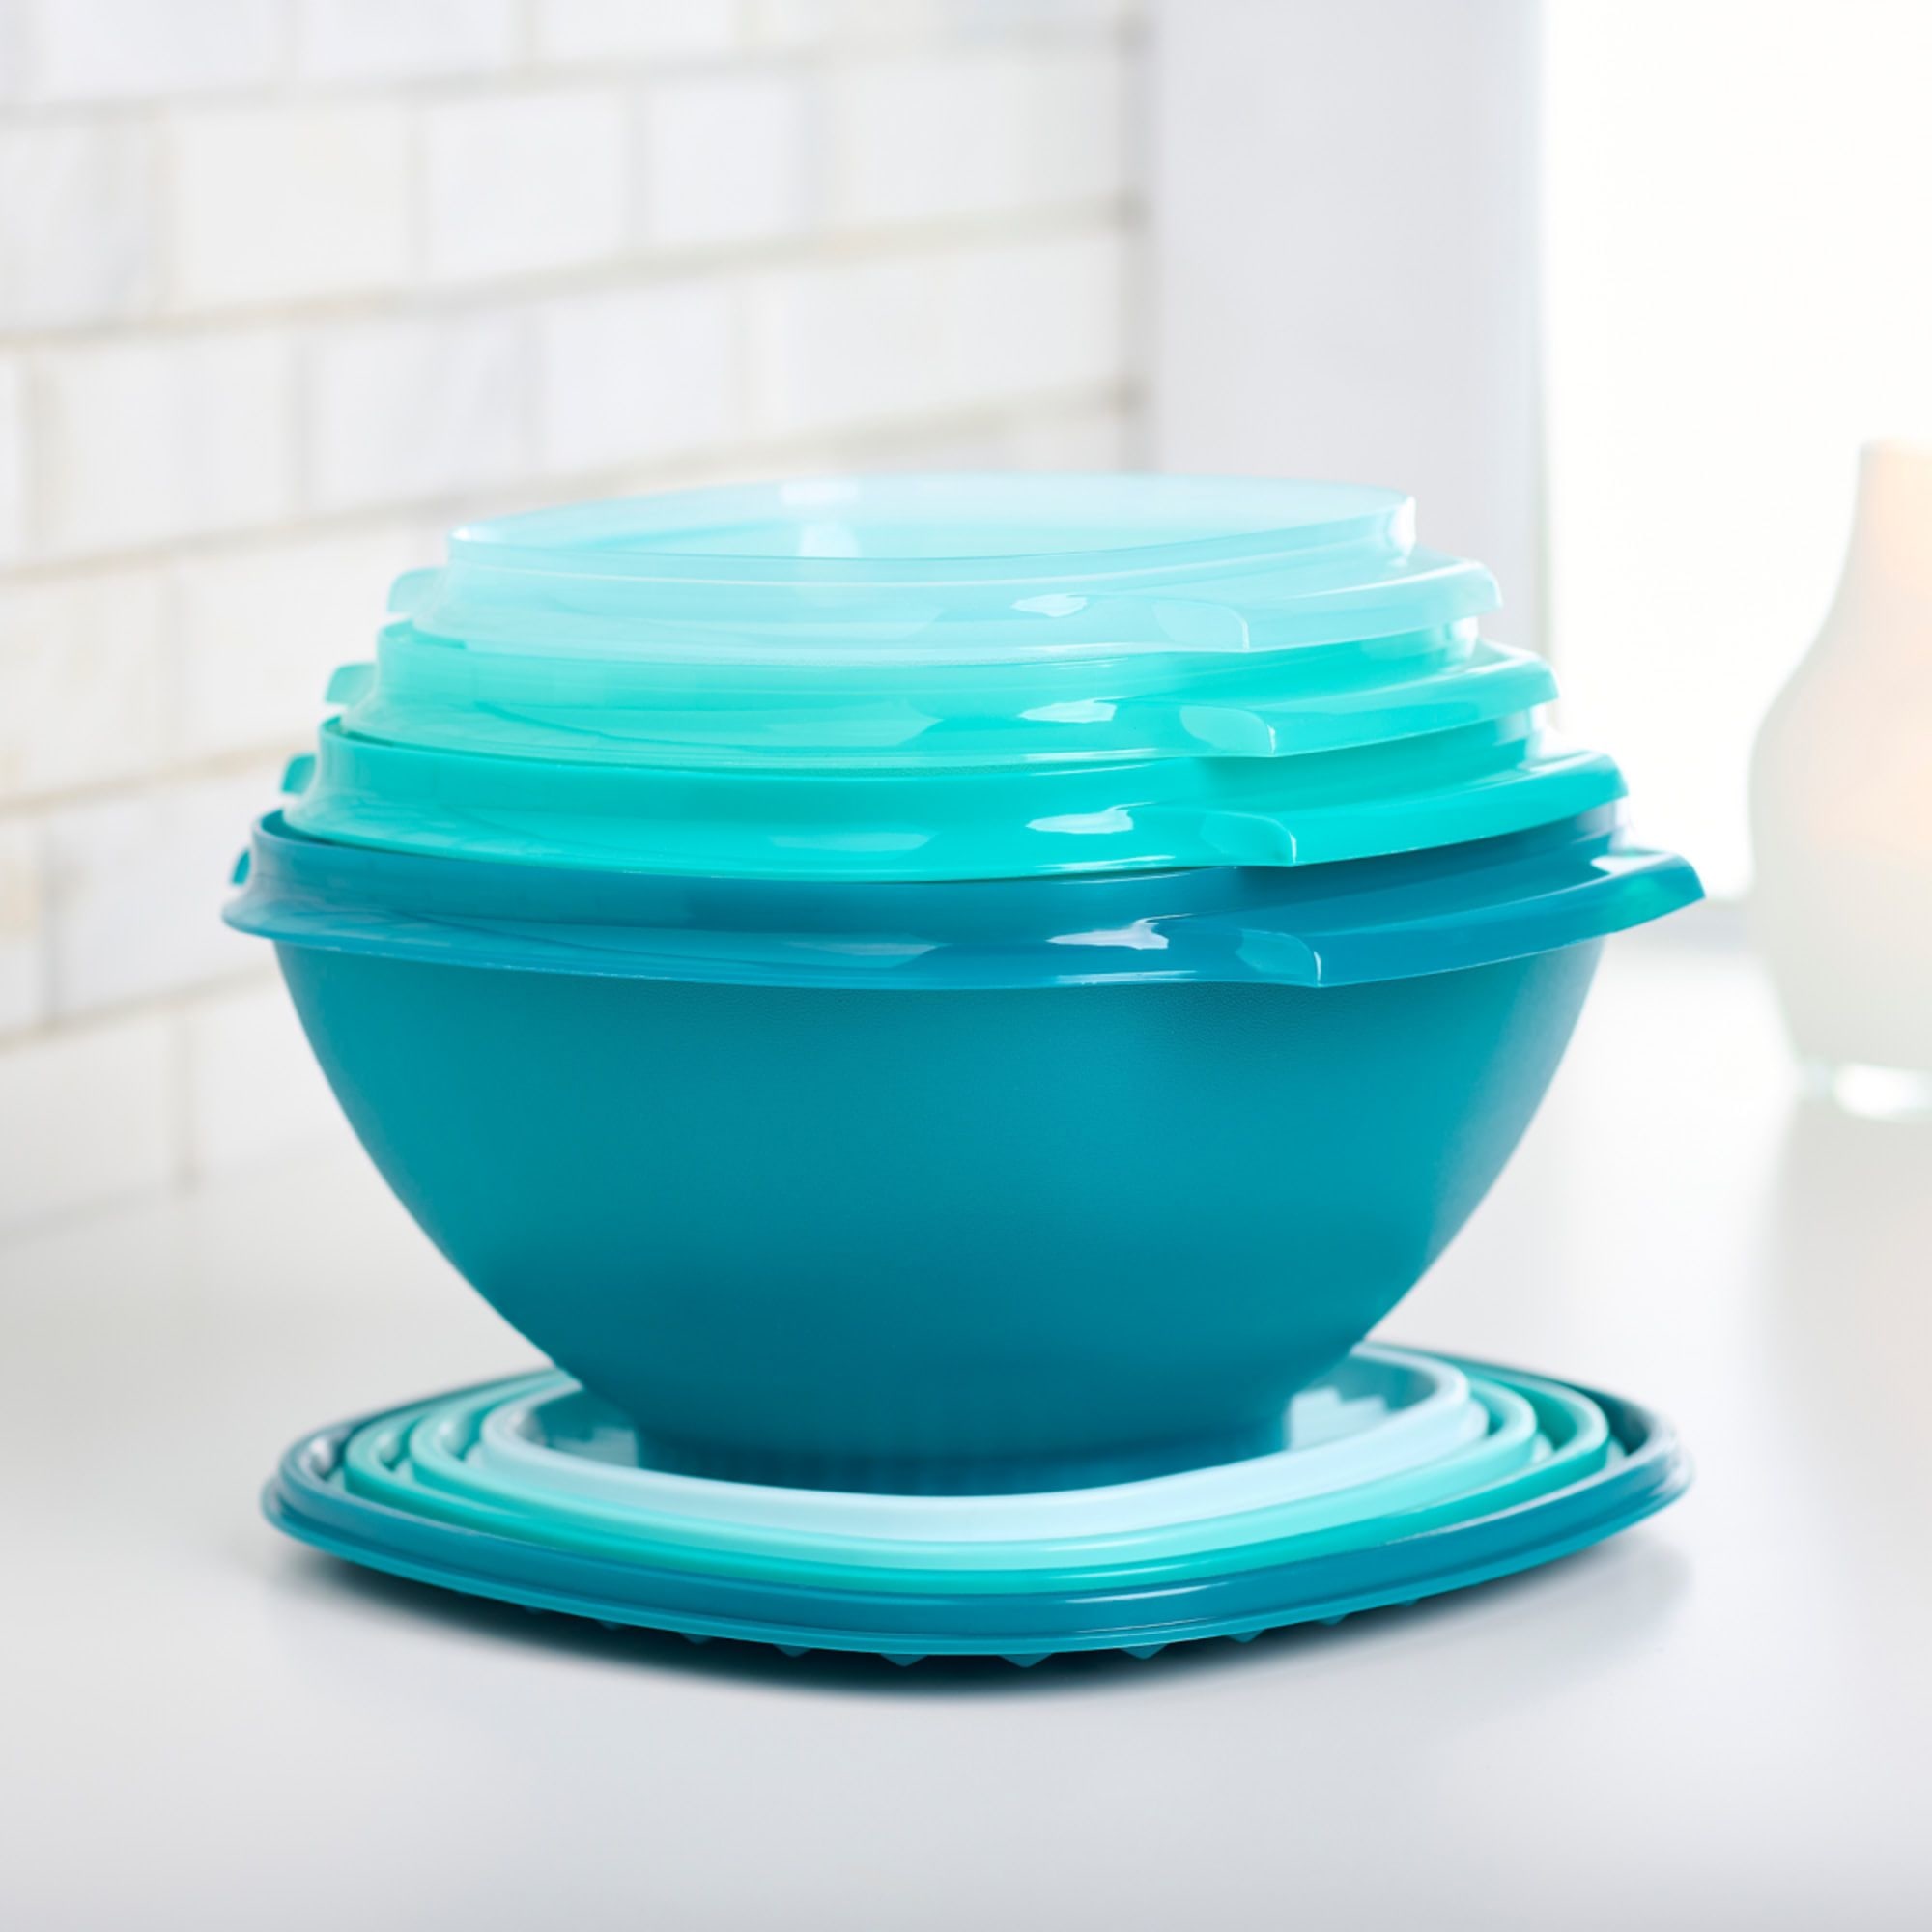 https://res.cloudinary.com/kitchenwarehouse/image/upload/c_fill,g_face,w_1250/f_auto/t_PDP_2000x2000/Supplier%20Images%20/2000px/Tupperware-Heritage-Storage-Bowl-Set-8pc-Green_4_2000px.jpg?imagetype=pdp_full